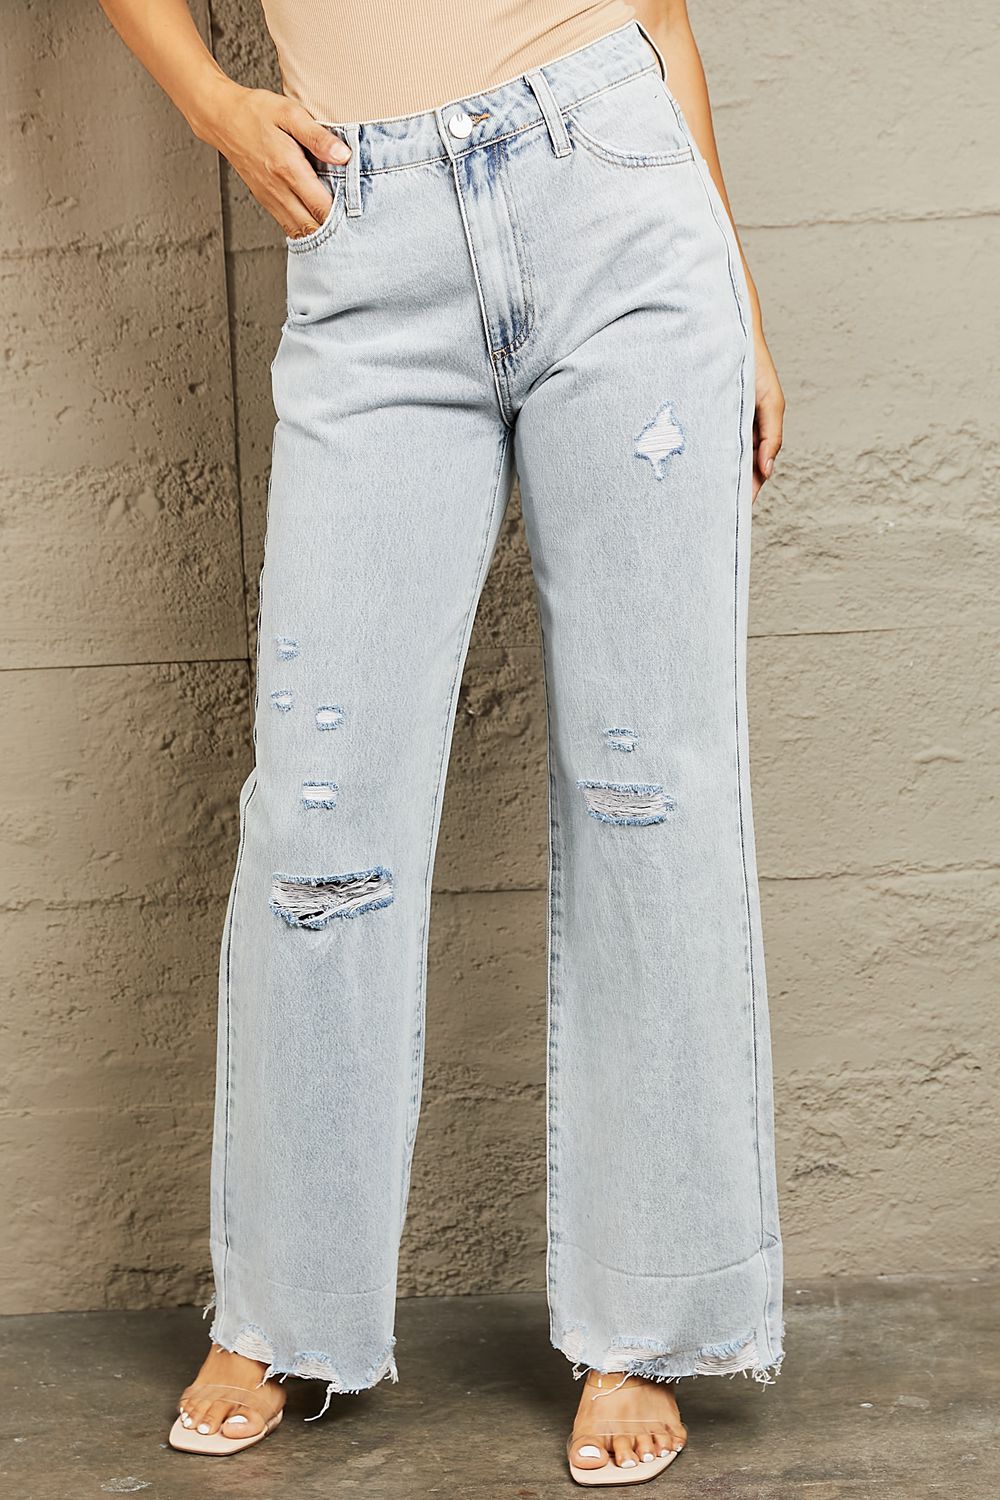 BAYEAS High Waist Flare Jeans - Jeans - FITGGINS